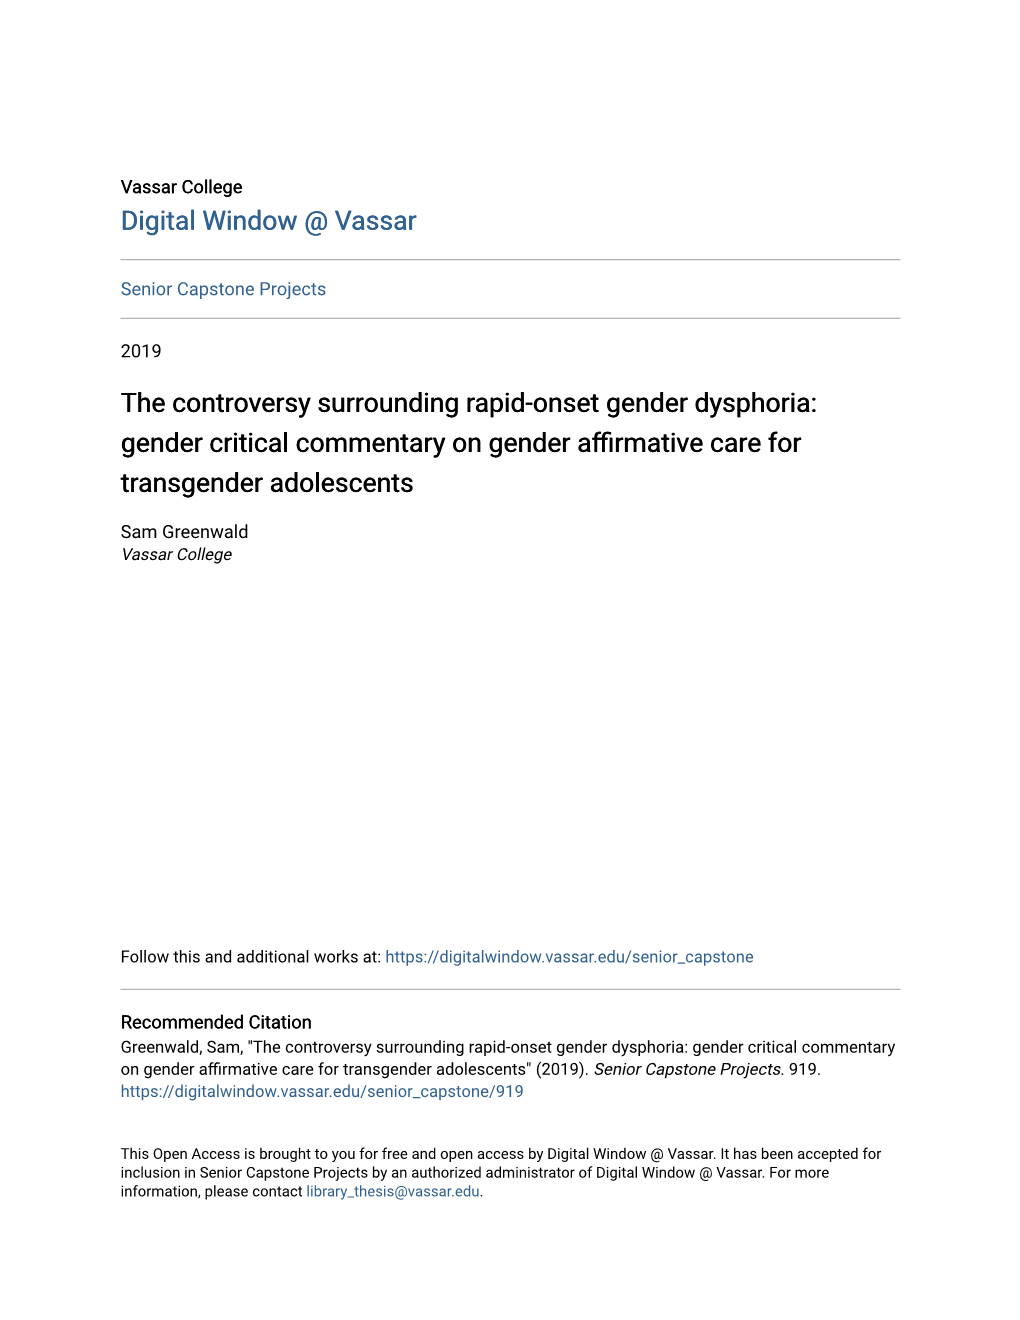 The Controversy Surrounding Rapid-Onset Gender Dysphoria: Gender Critical Commentary on Gender Affirmative Care for Transgender Adolescents